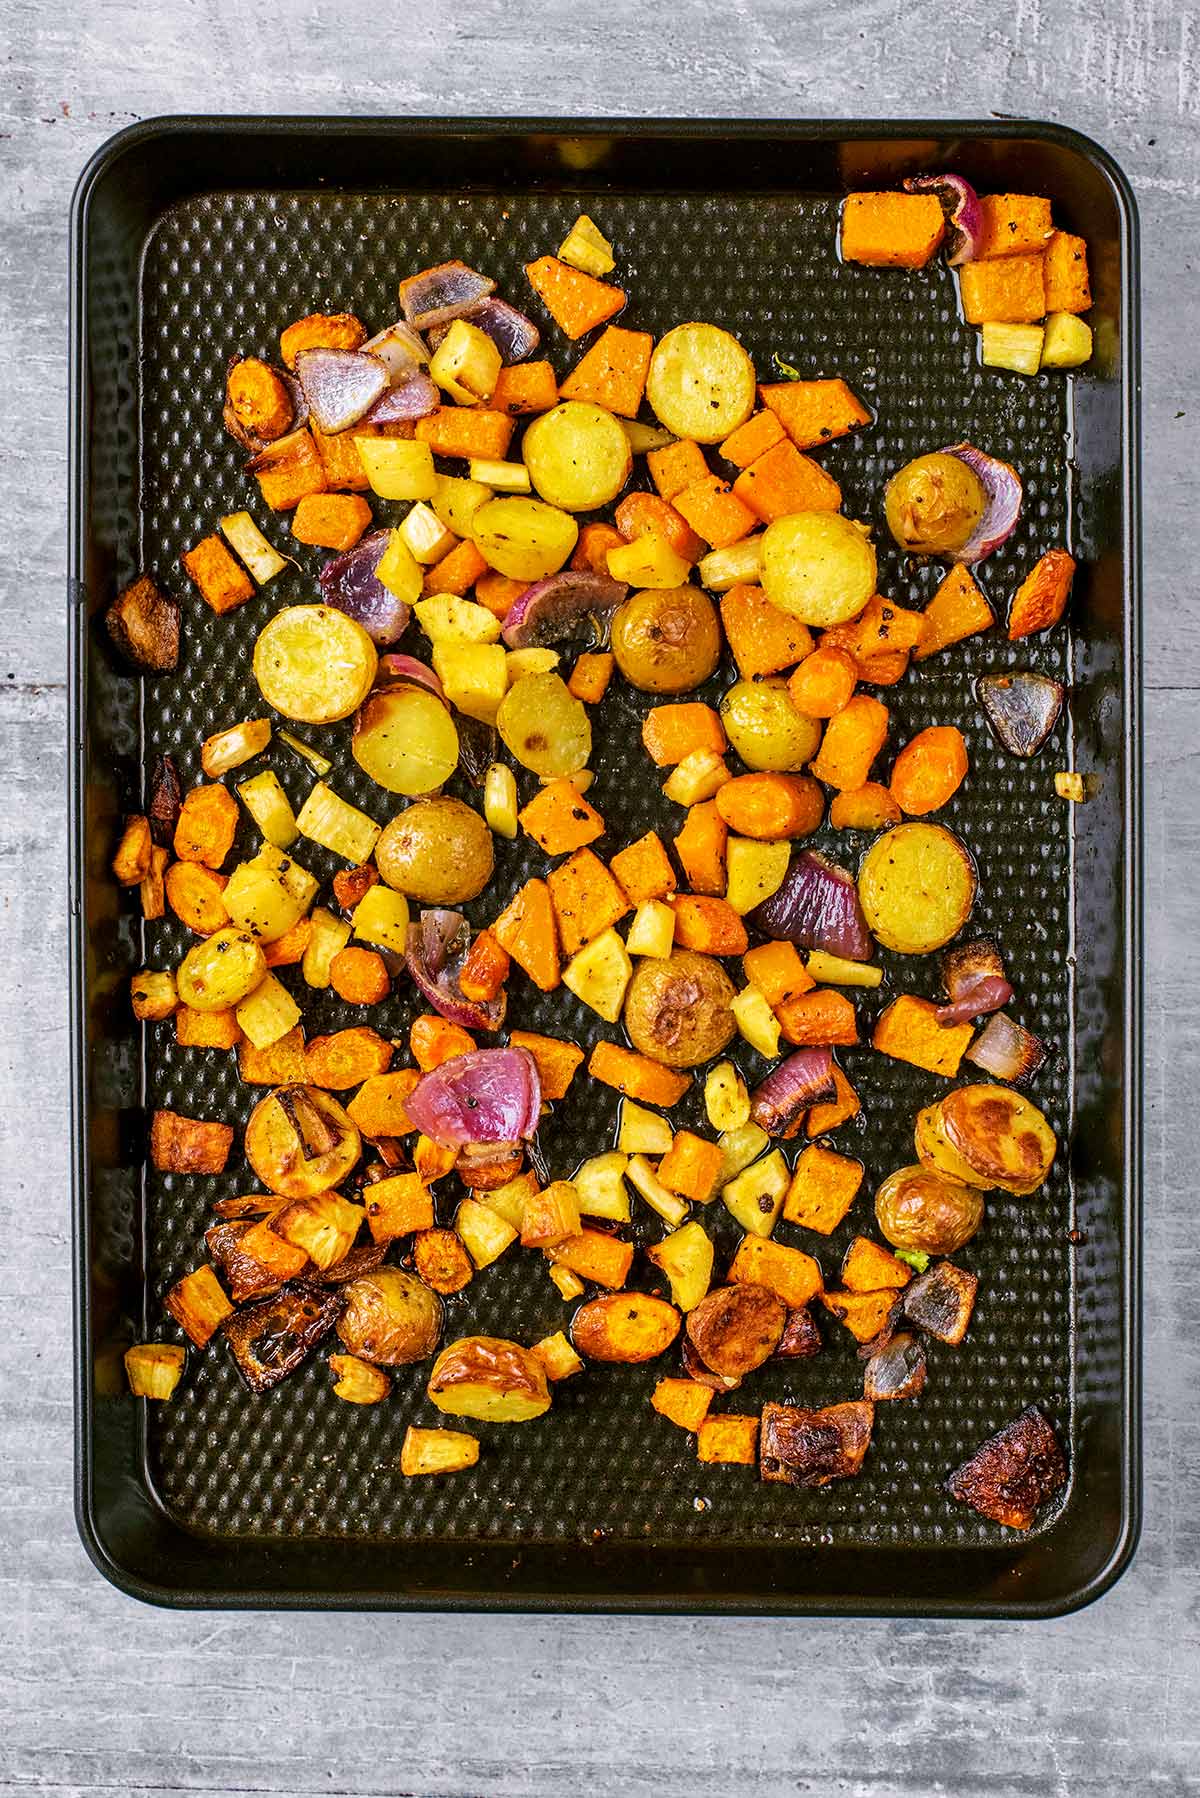 A baking tray with cooked chopped vegetables covering it.